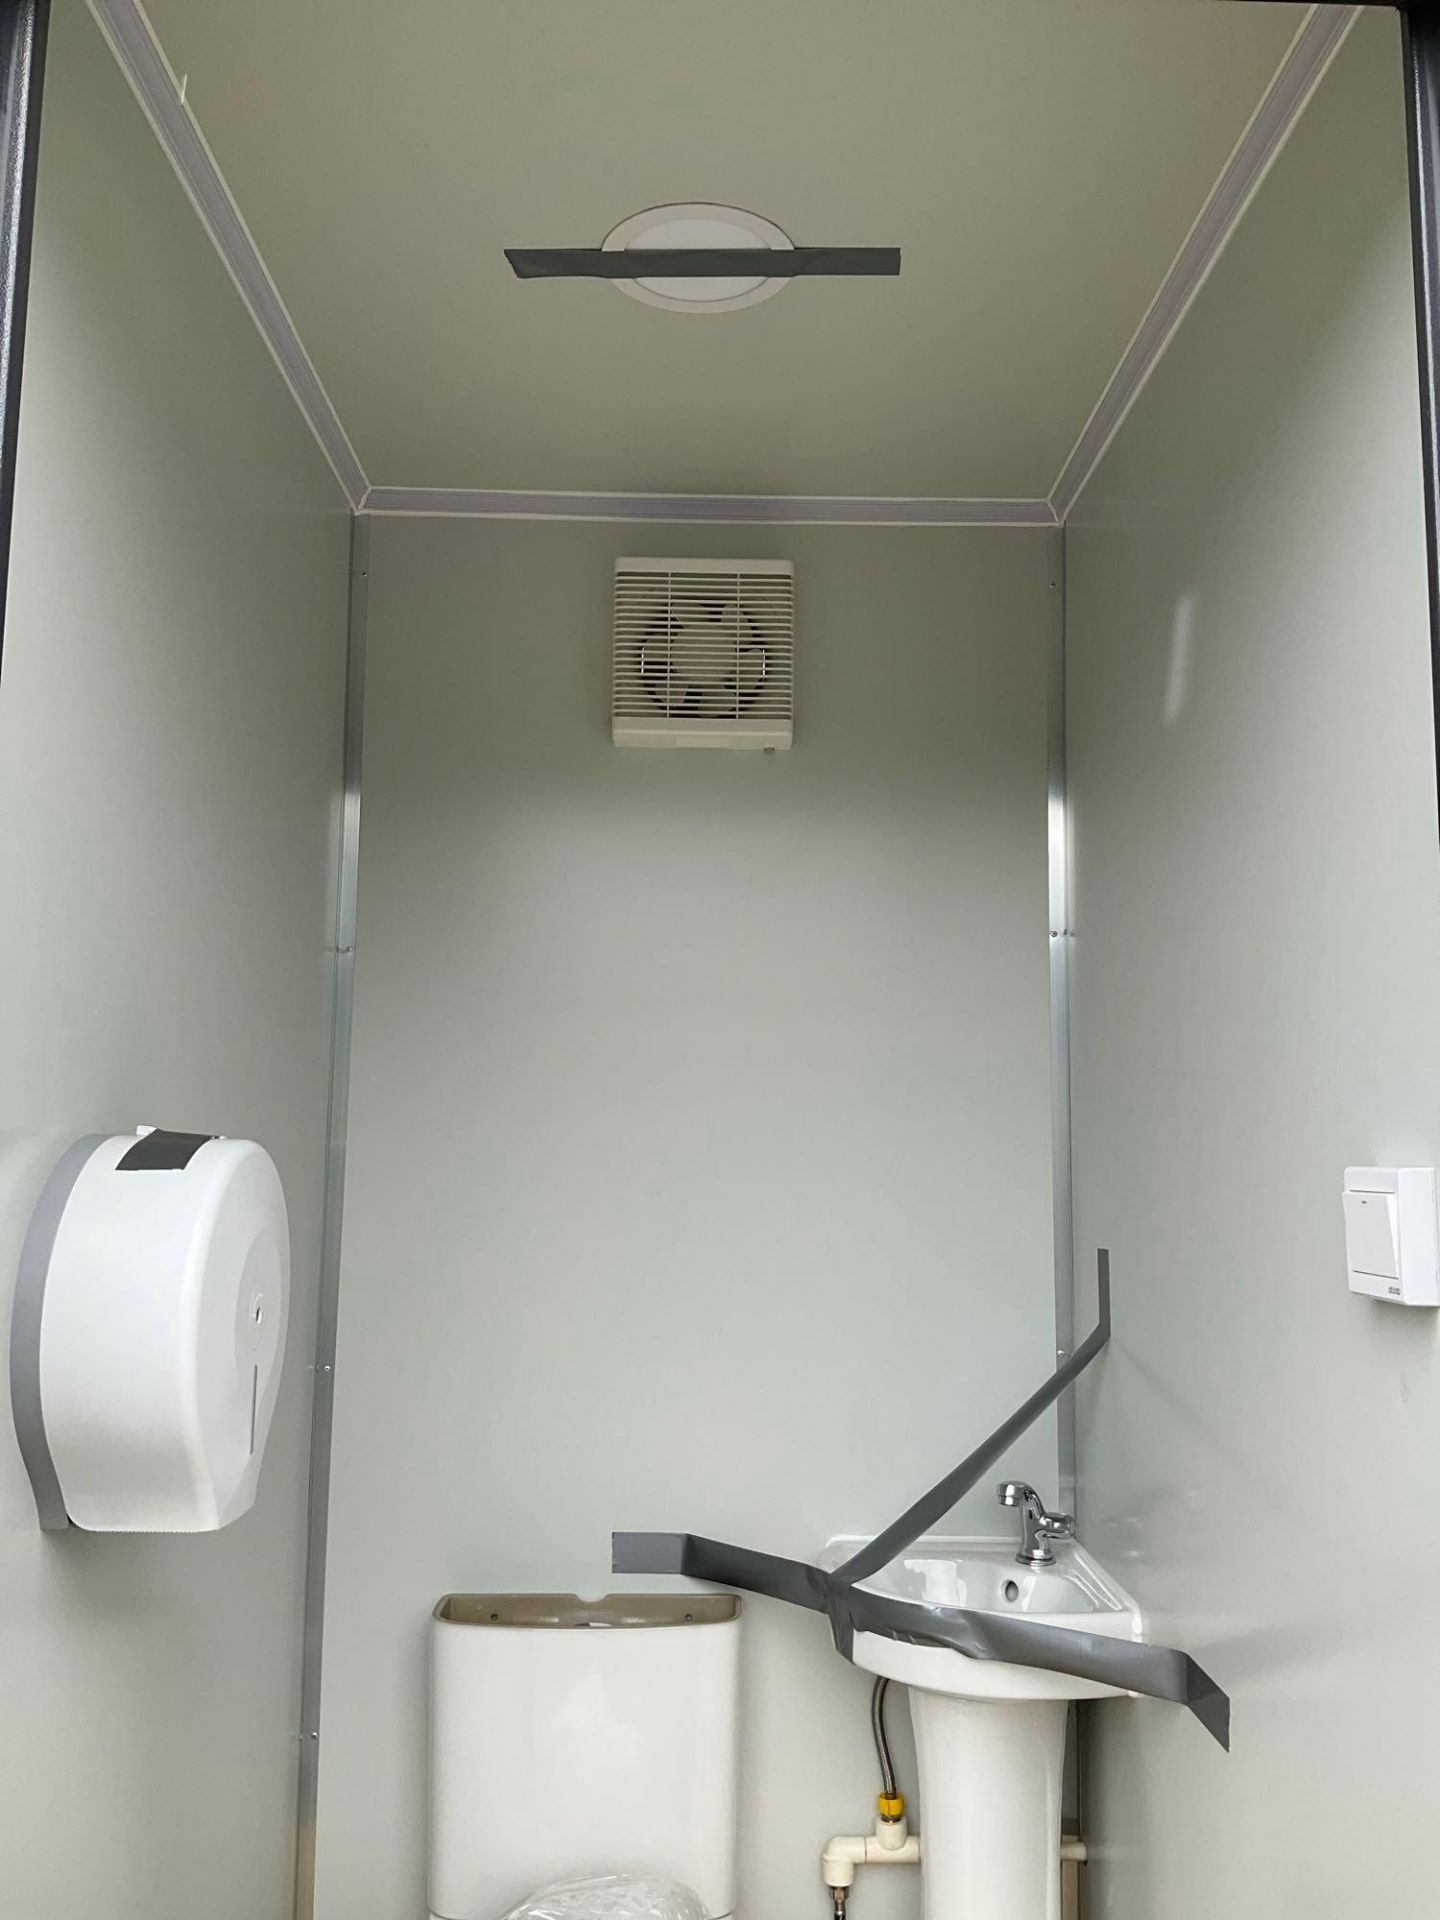 UNUSED PORTABLE DOUBLE BATHROOM UNIT, 2 STALLS, ELECTRIC & PLUMBING HOOK UP WITH EXTERIOR PLUMBING C - Image 16 of 16